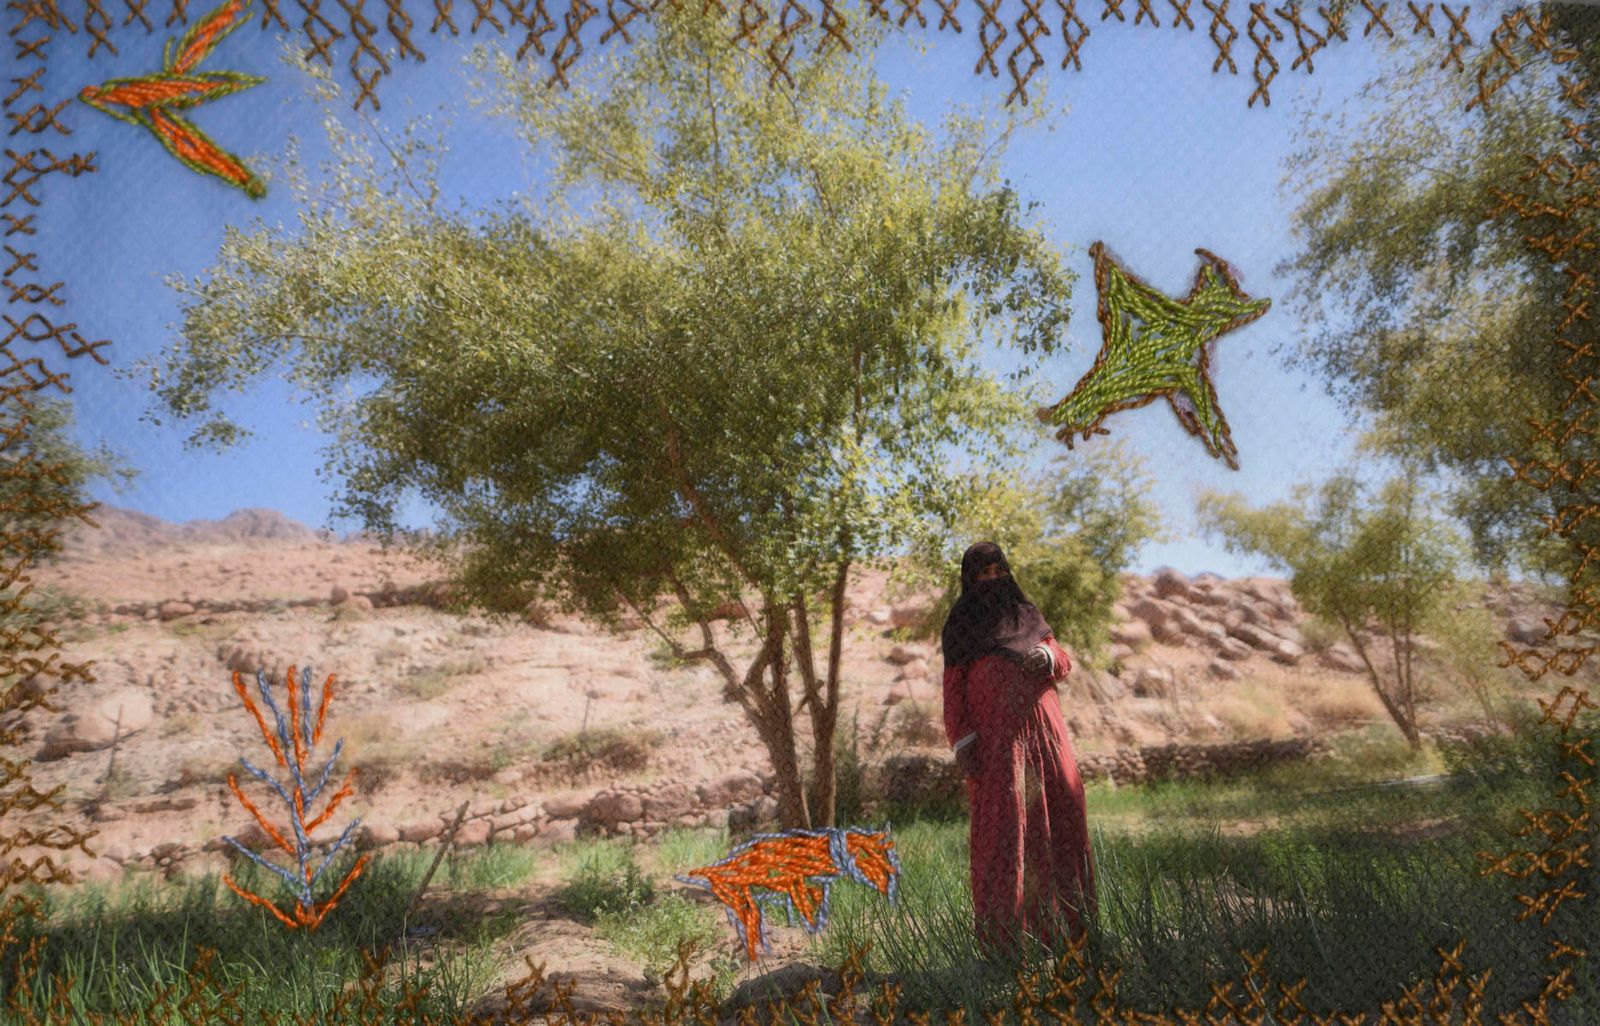 © Rehab Eldalil - Embroidered photograph of Hajja Oum Mohamed (53) in her garden in Gharba Valley. Embroidery by her.